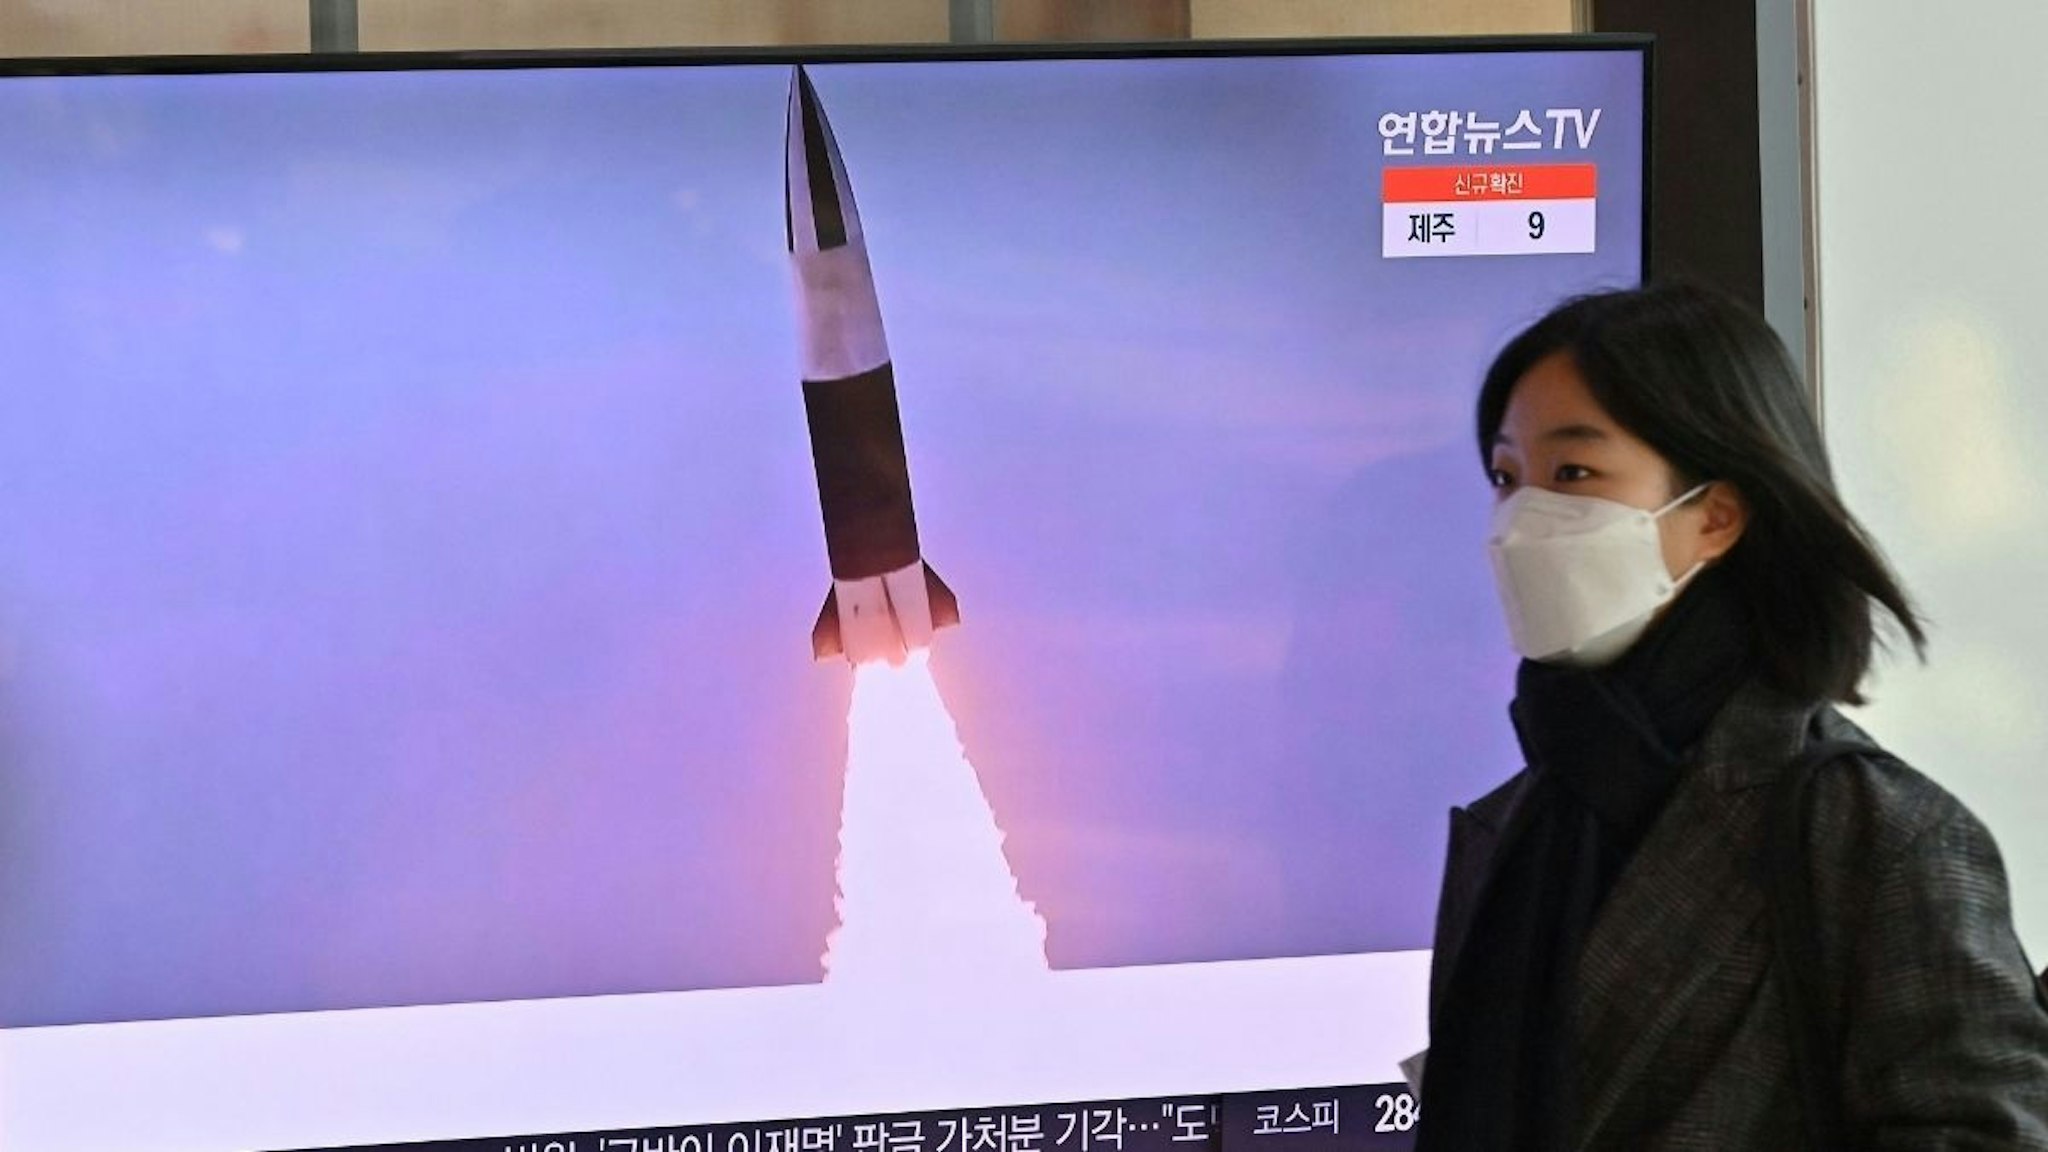 A woman walks past a television screen showing a news broadcast with file footage of a North Korean missile test, at a railway station in Seoul on January 20, 2022, after North Korea hinted it could resume nuclear and long-range weapons tests, as it prepared for "long-term confrontation" with the United States, following a string of sanction-busting missile launches this month.